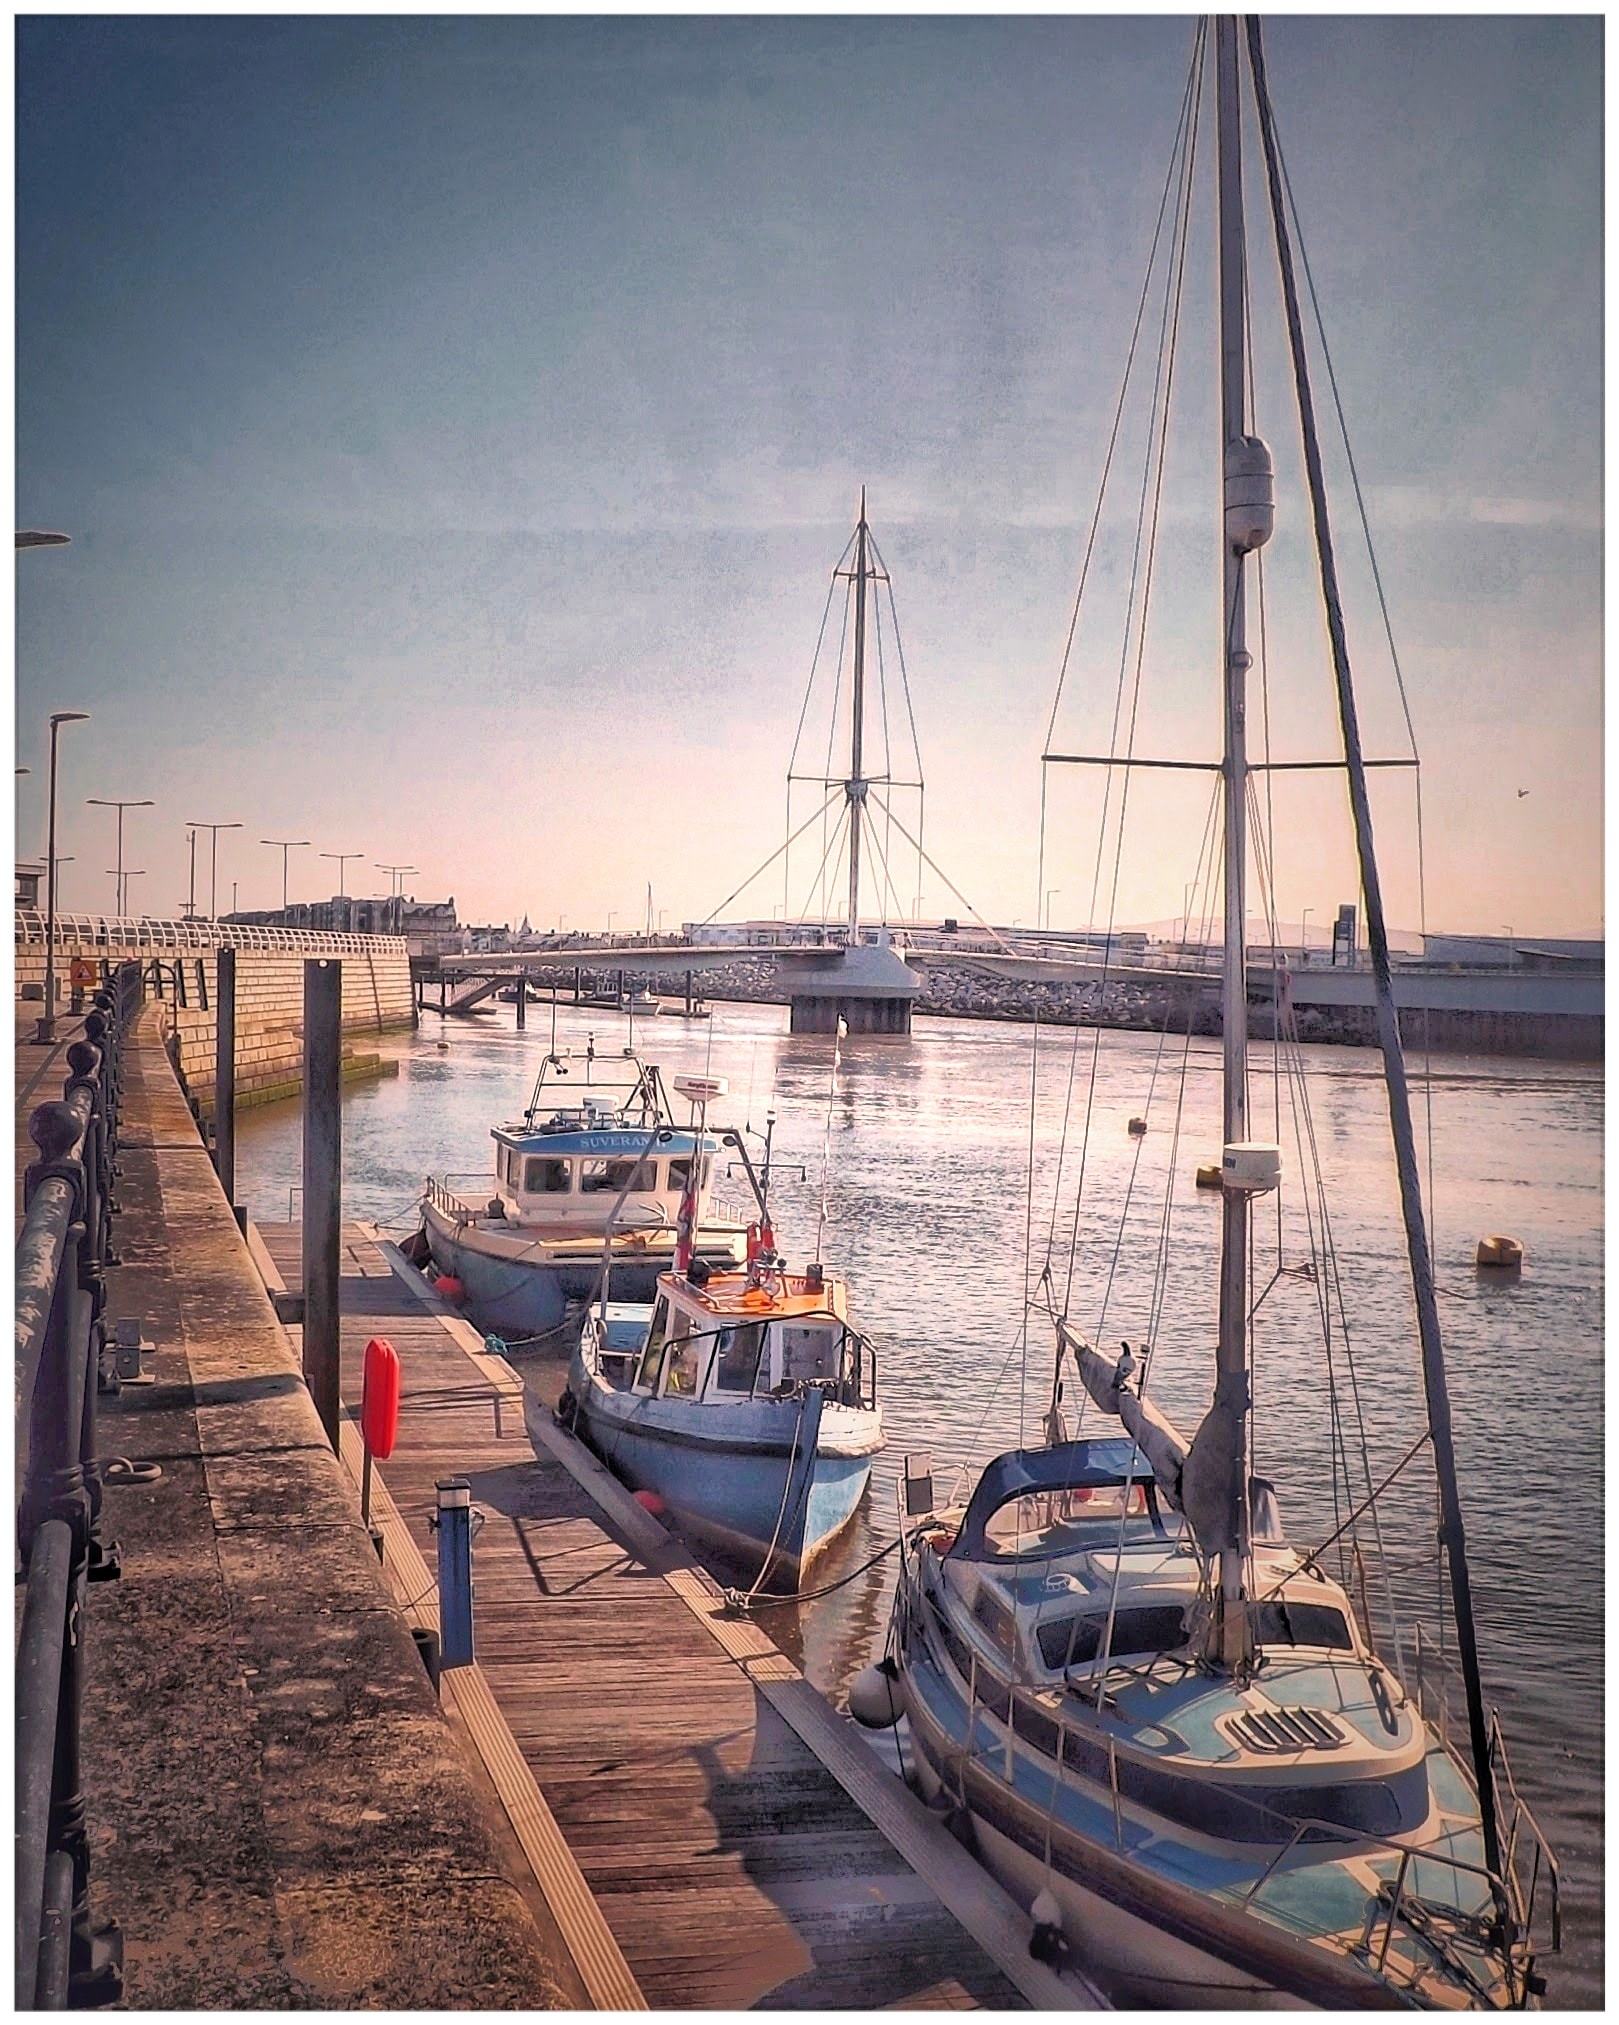 Mark Rowland Jones took this photo of the harbour and bridge at Rhyl.